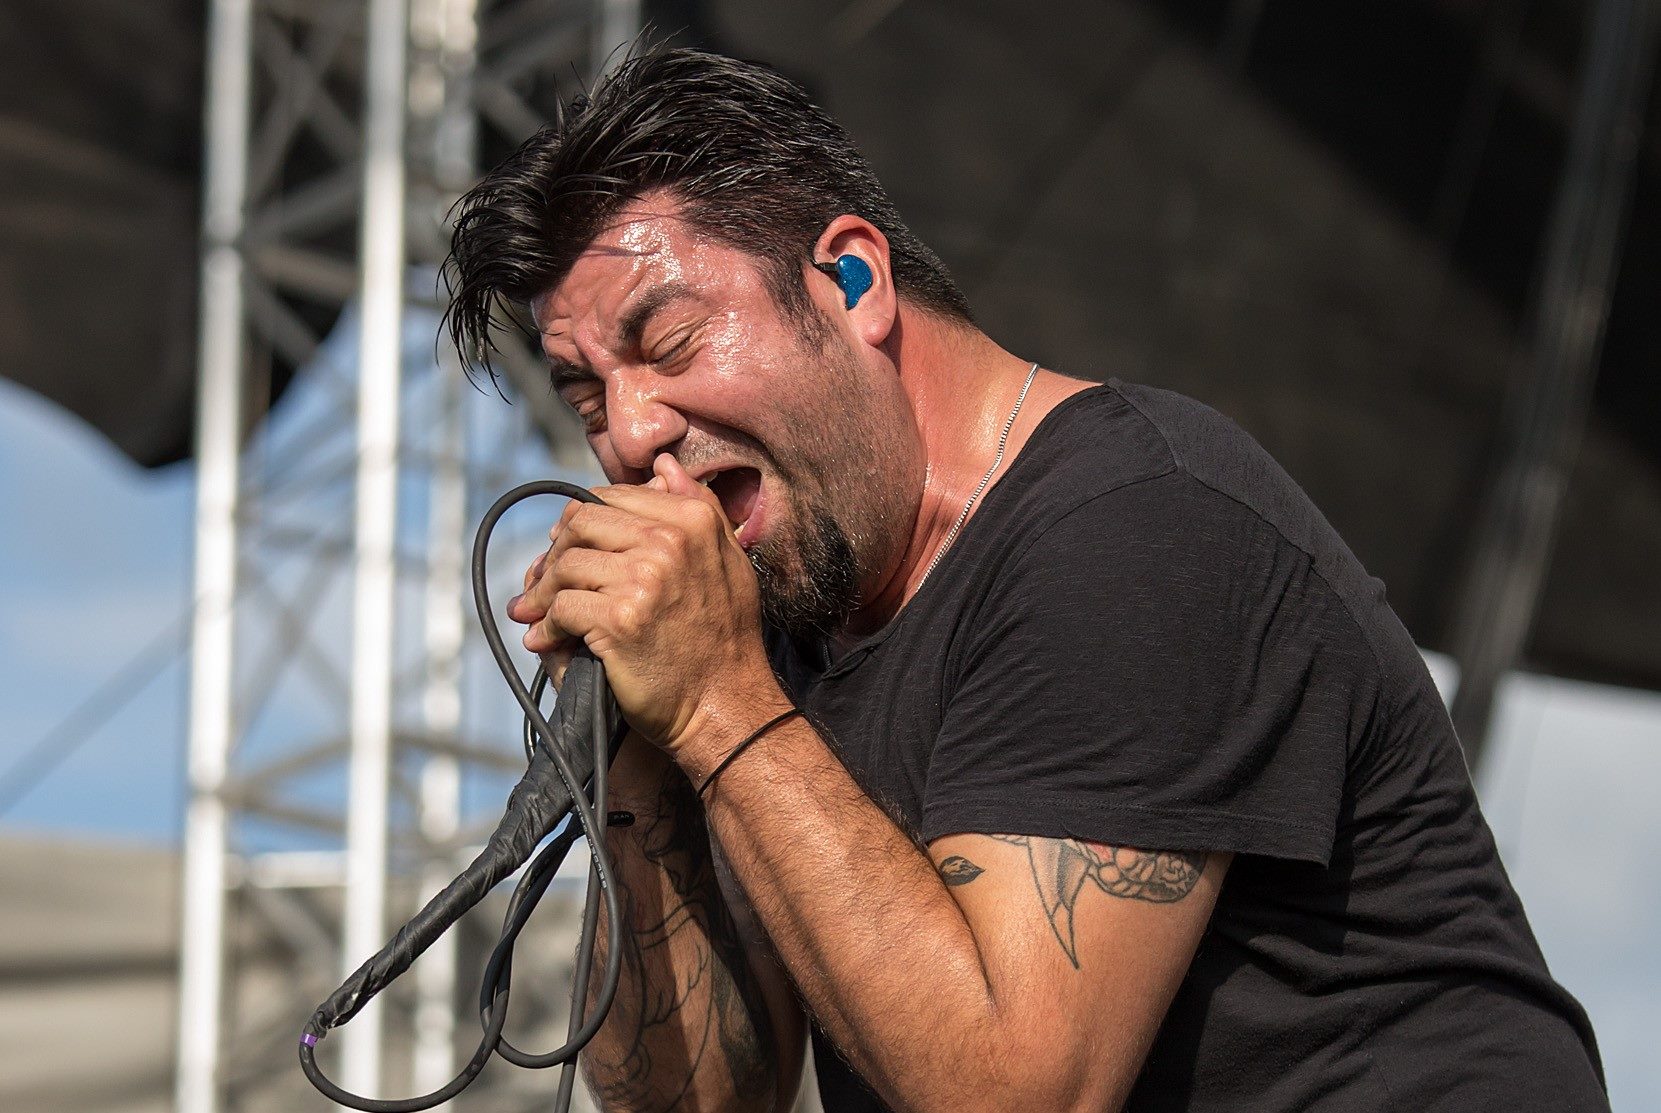 22 Surprising Facts About Chino Moreno - Facts.net